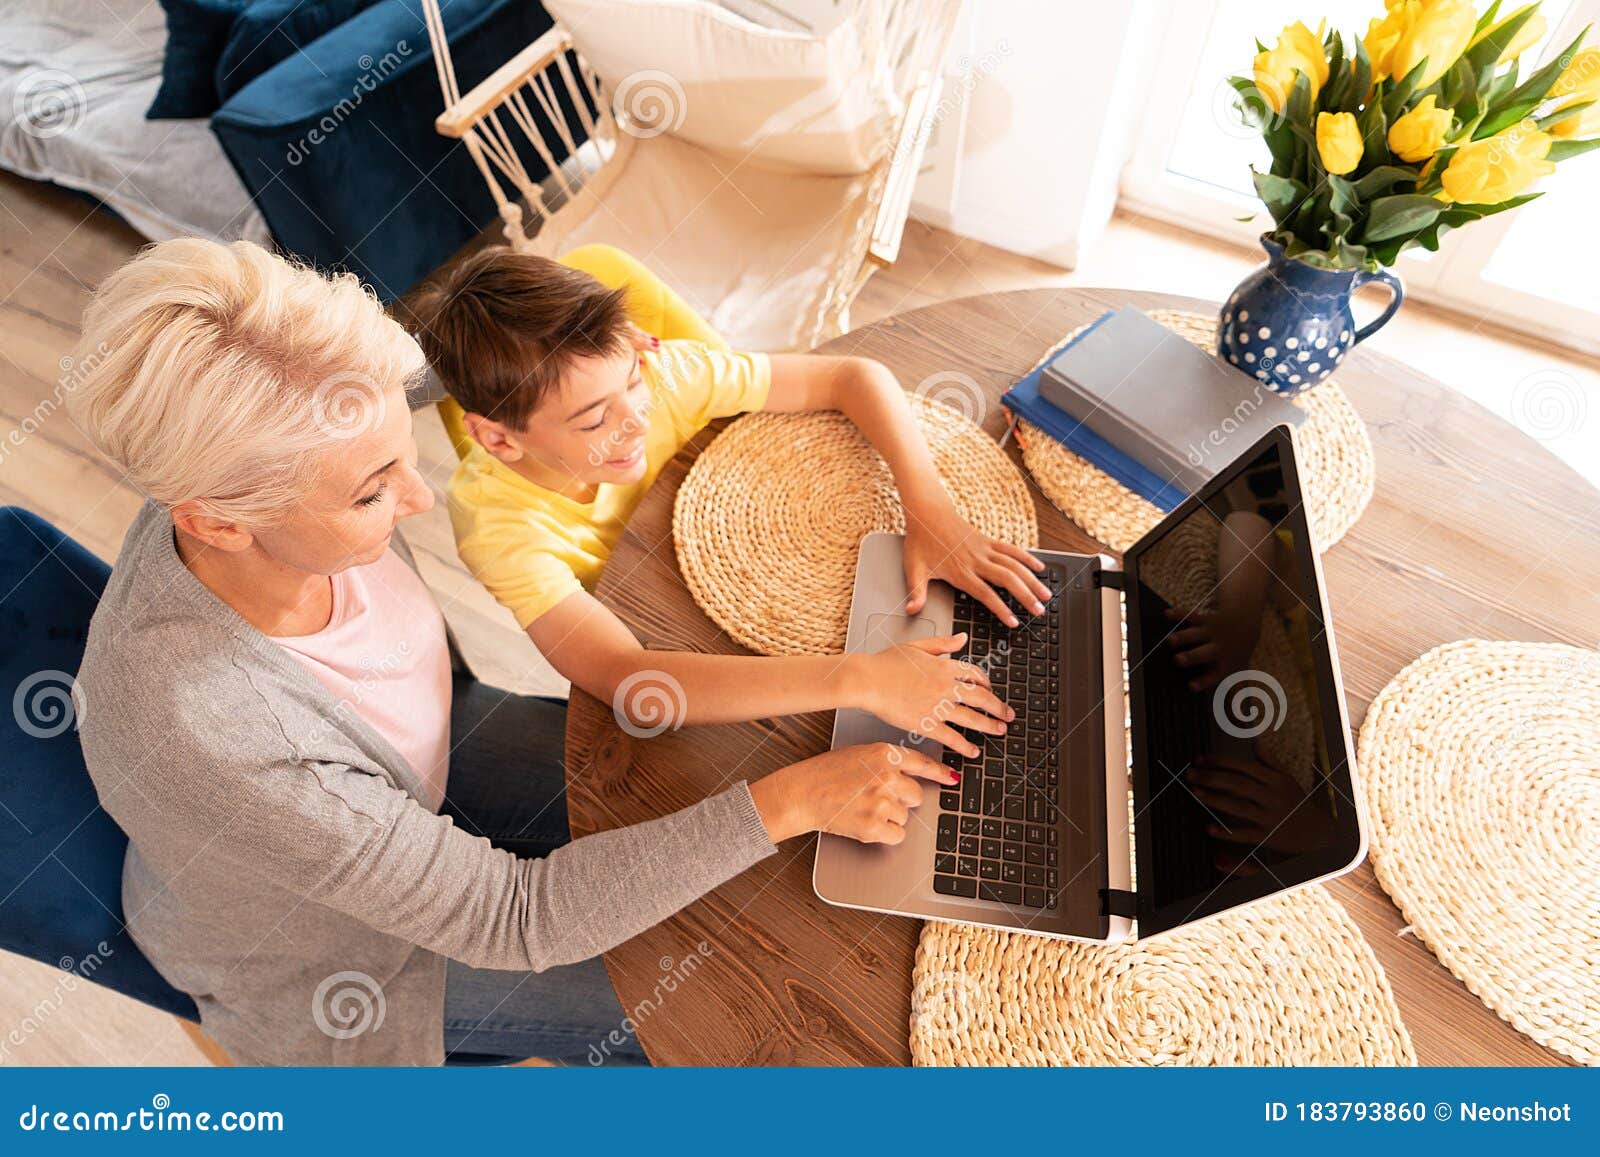 Mom Helping Son With Online Lesson Stock Photo Image Of People Child